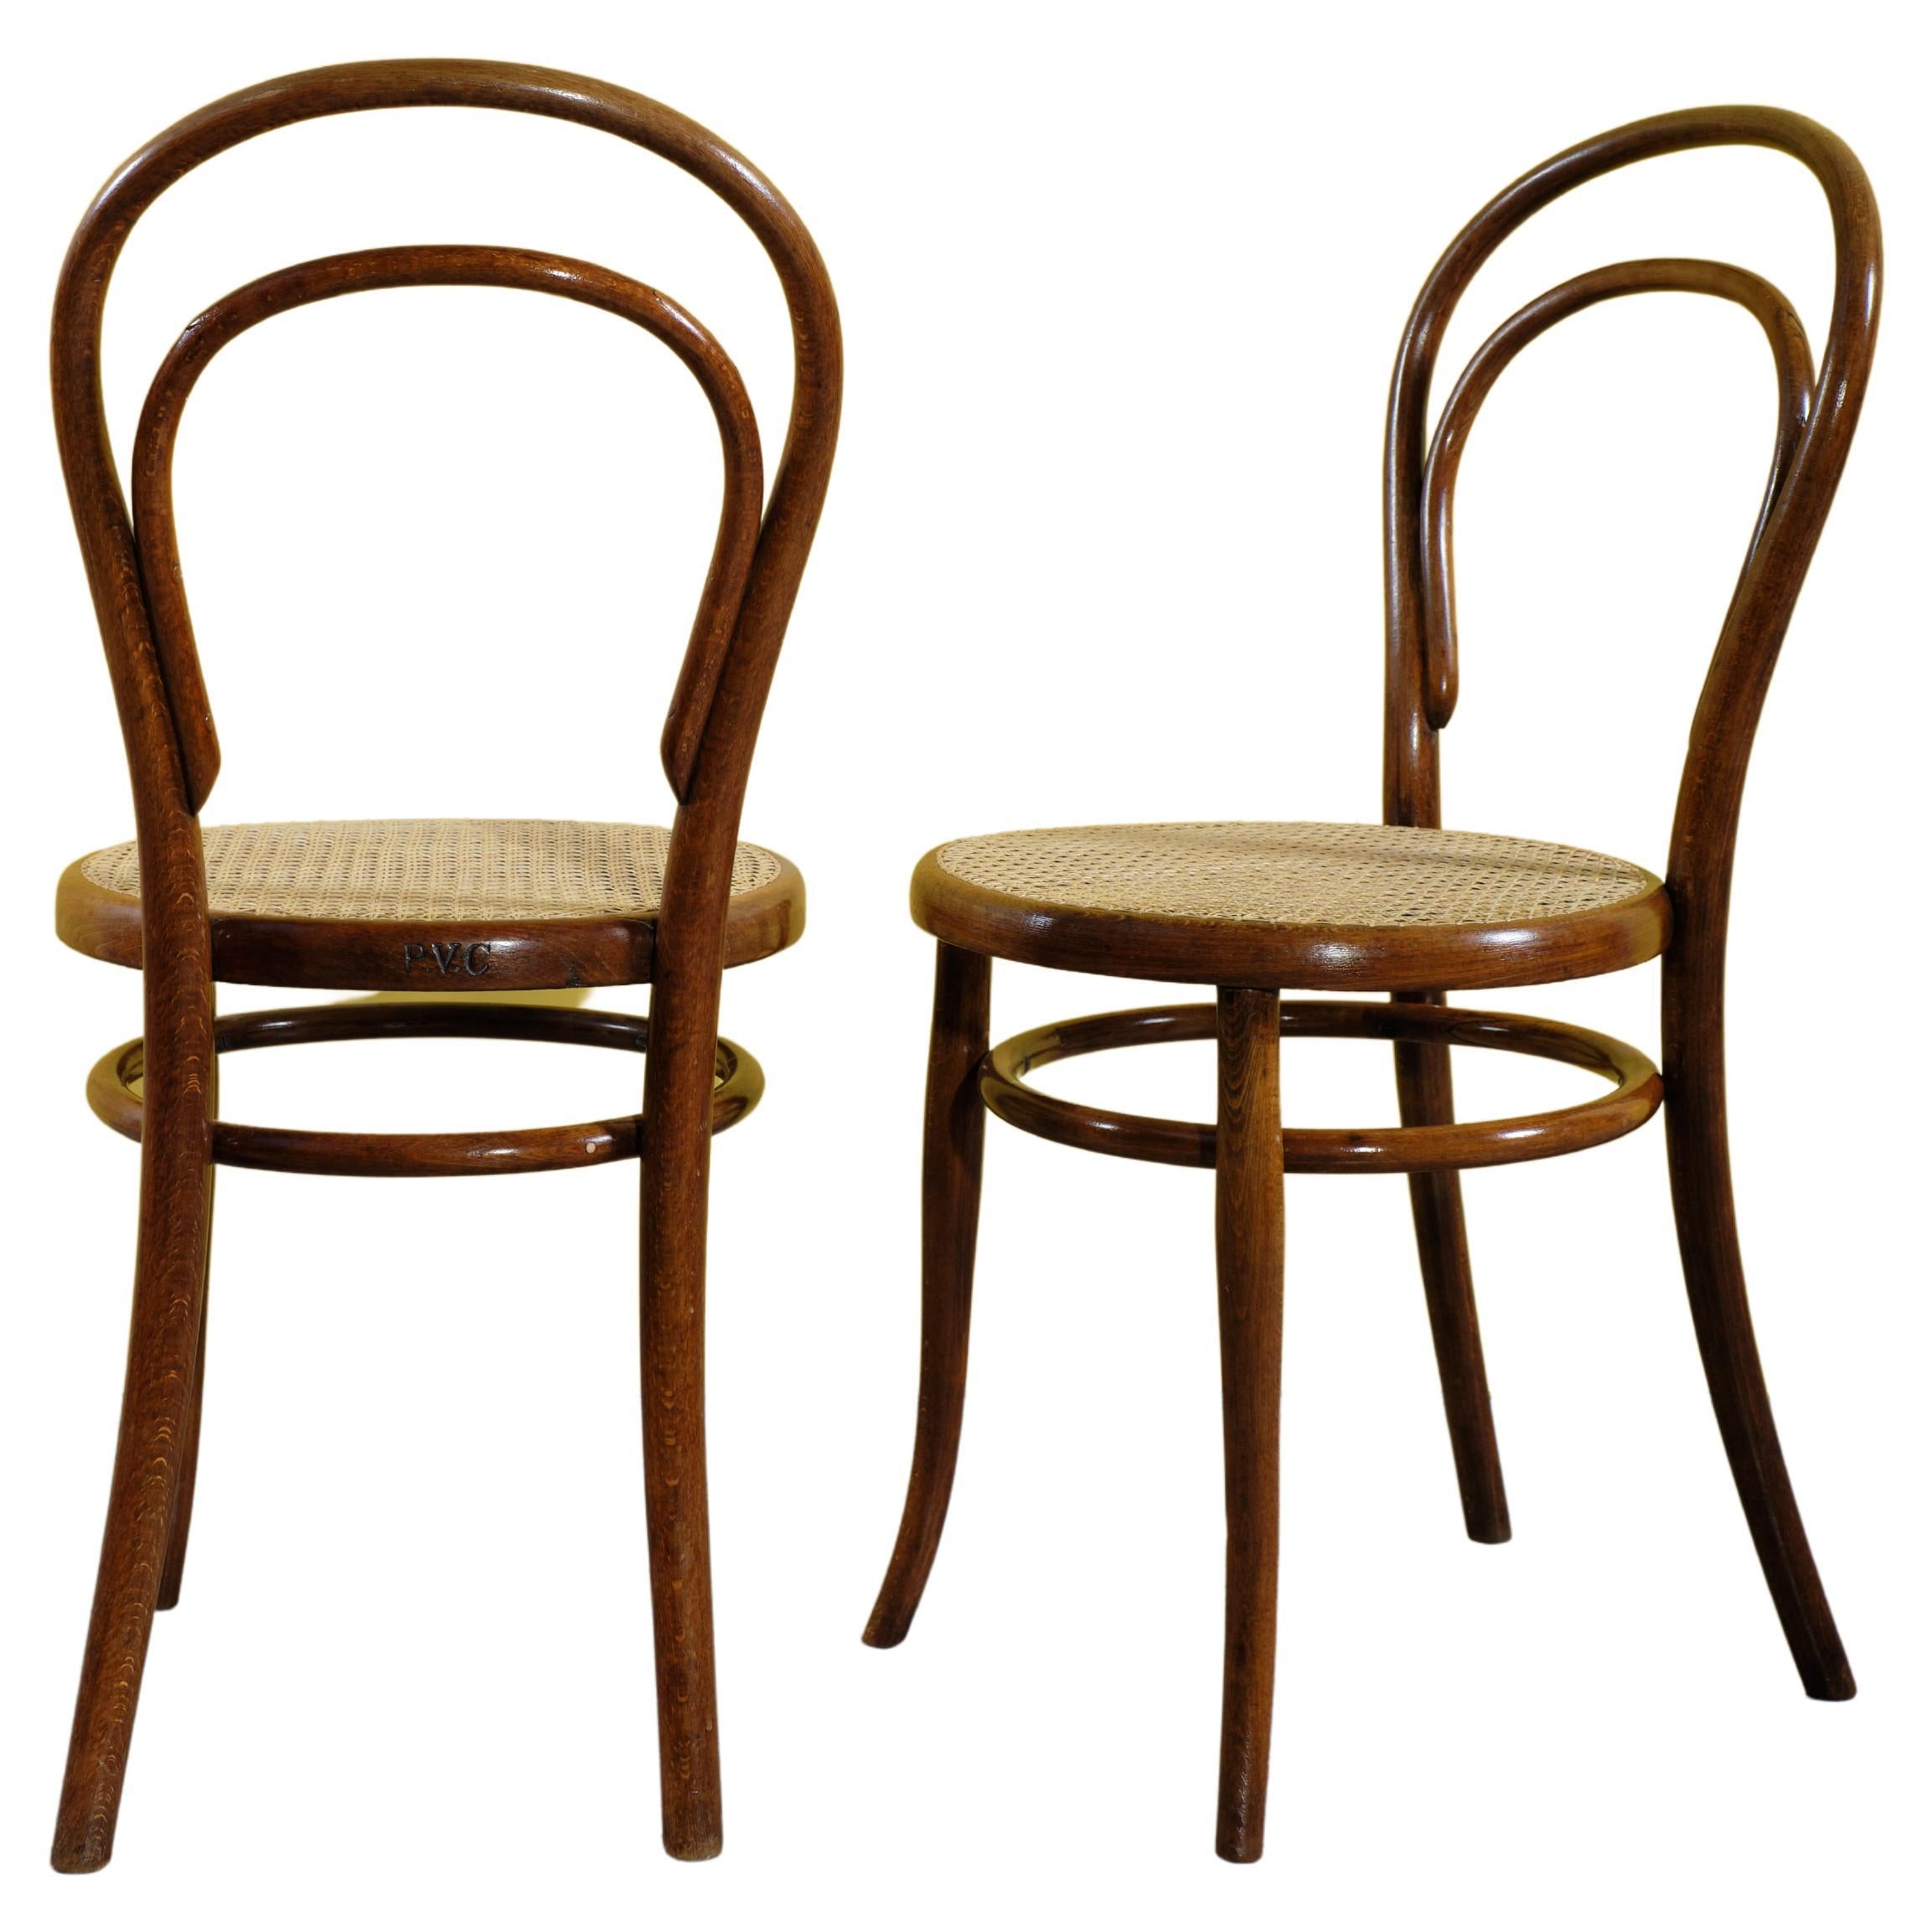 Pair of Early No. 14 Bentwood Side Chairs, by Michel Thonet, bistro chair, 1890s For Sale